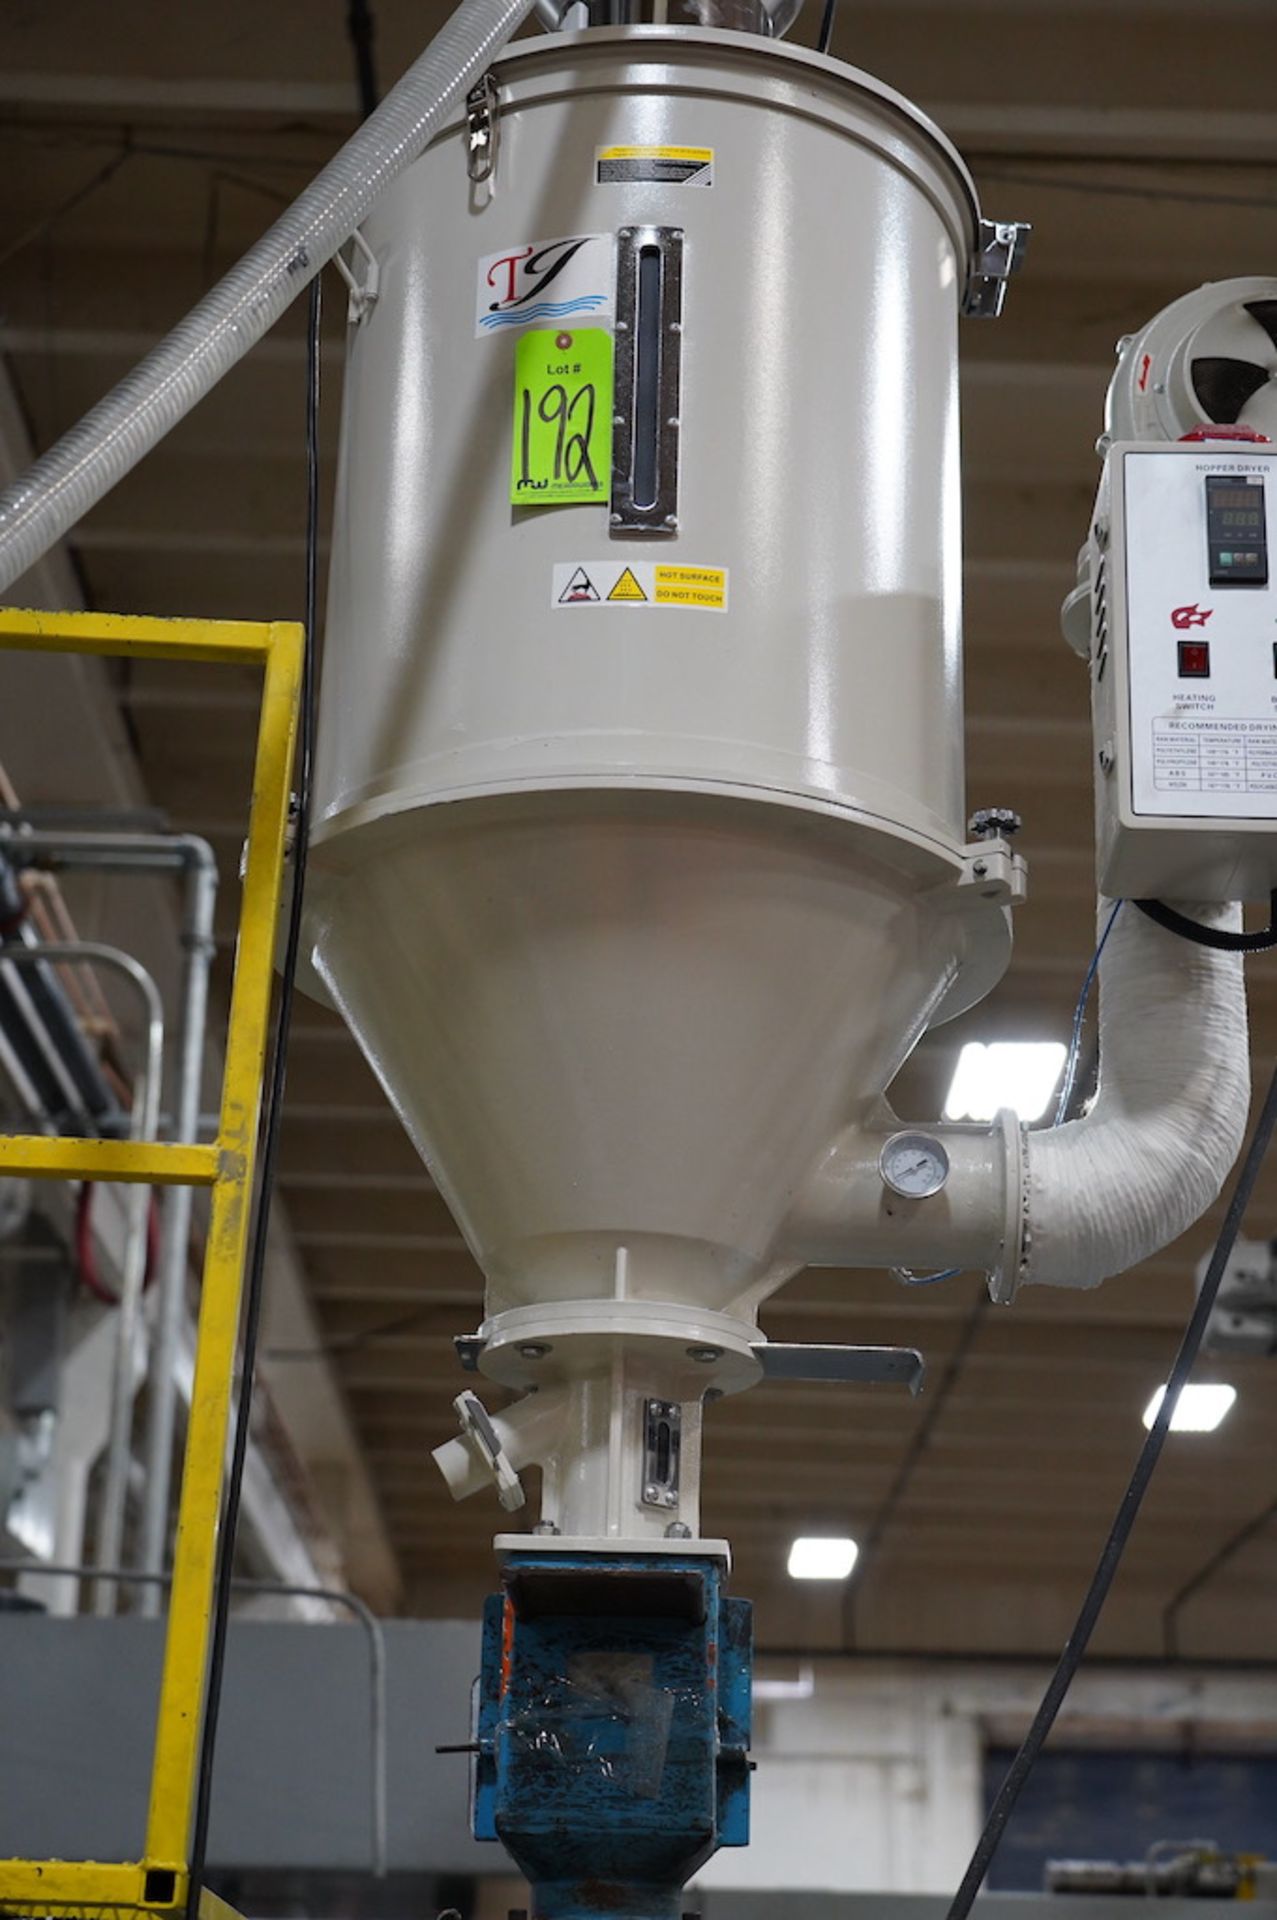 TJ XHD-100KG Hot Air Hopper Dryer, New in 2021 - Image 2 of 4